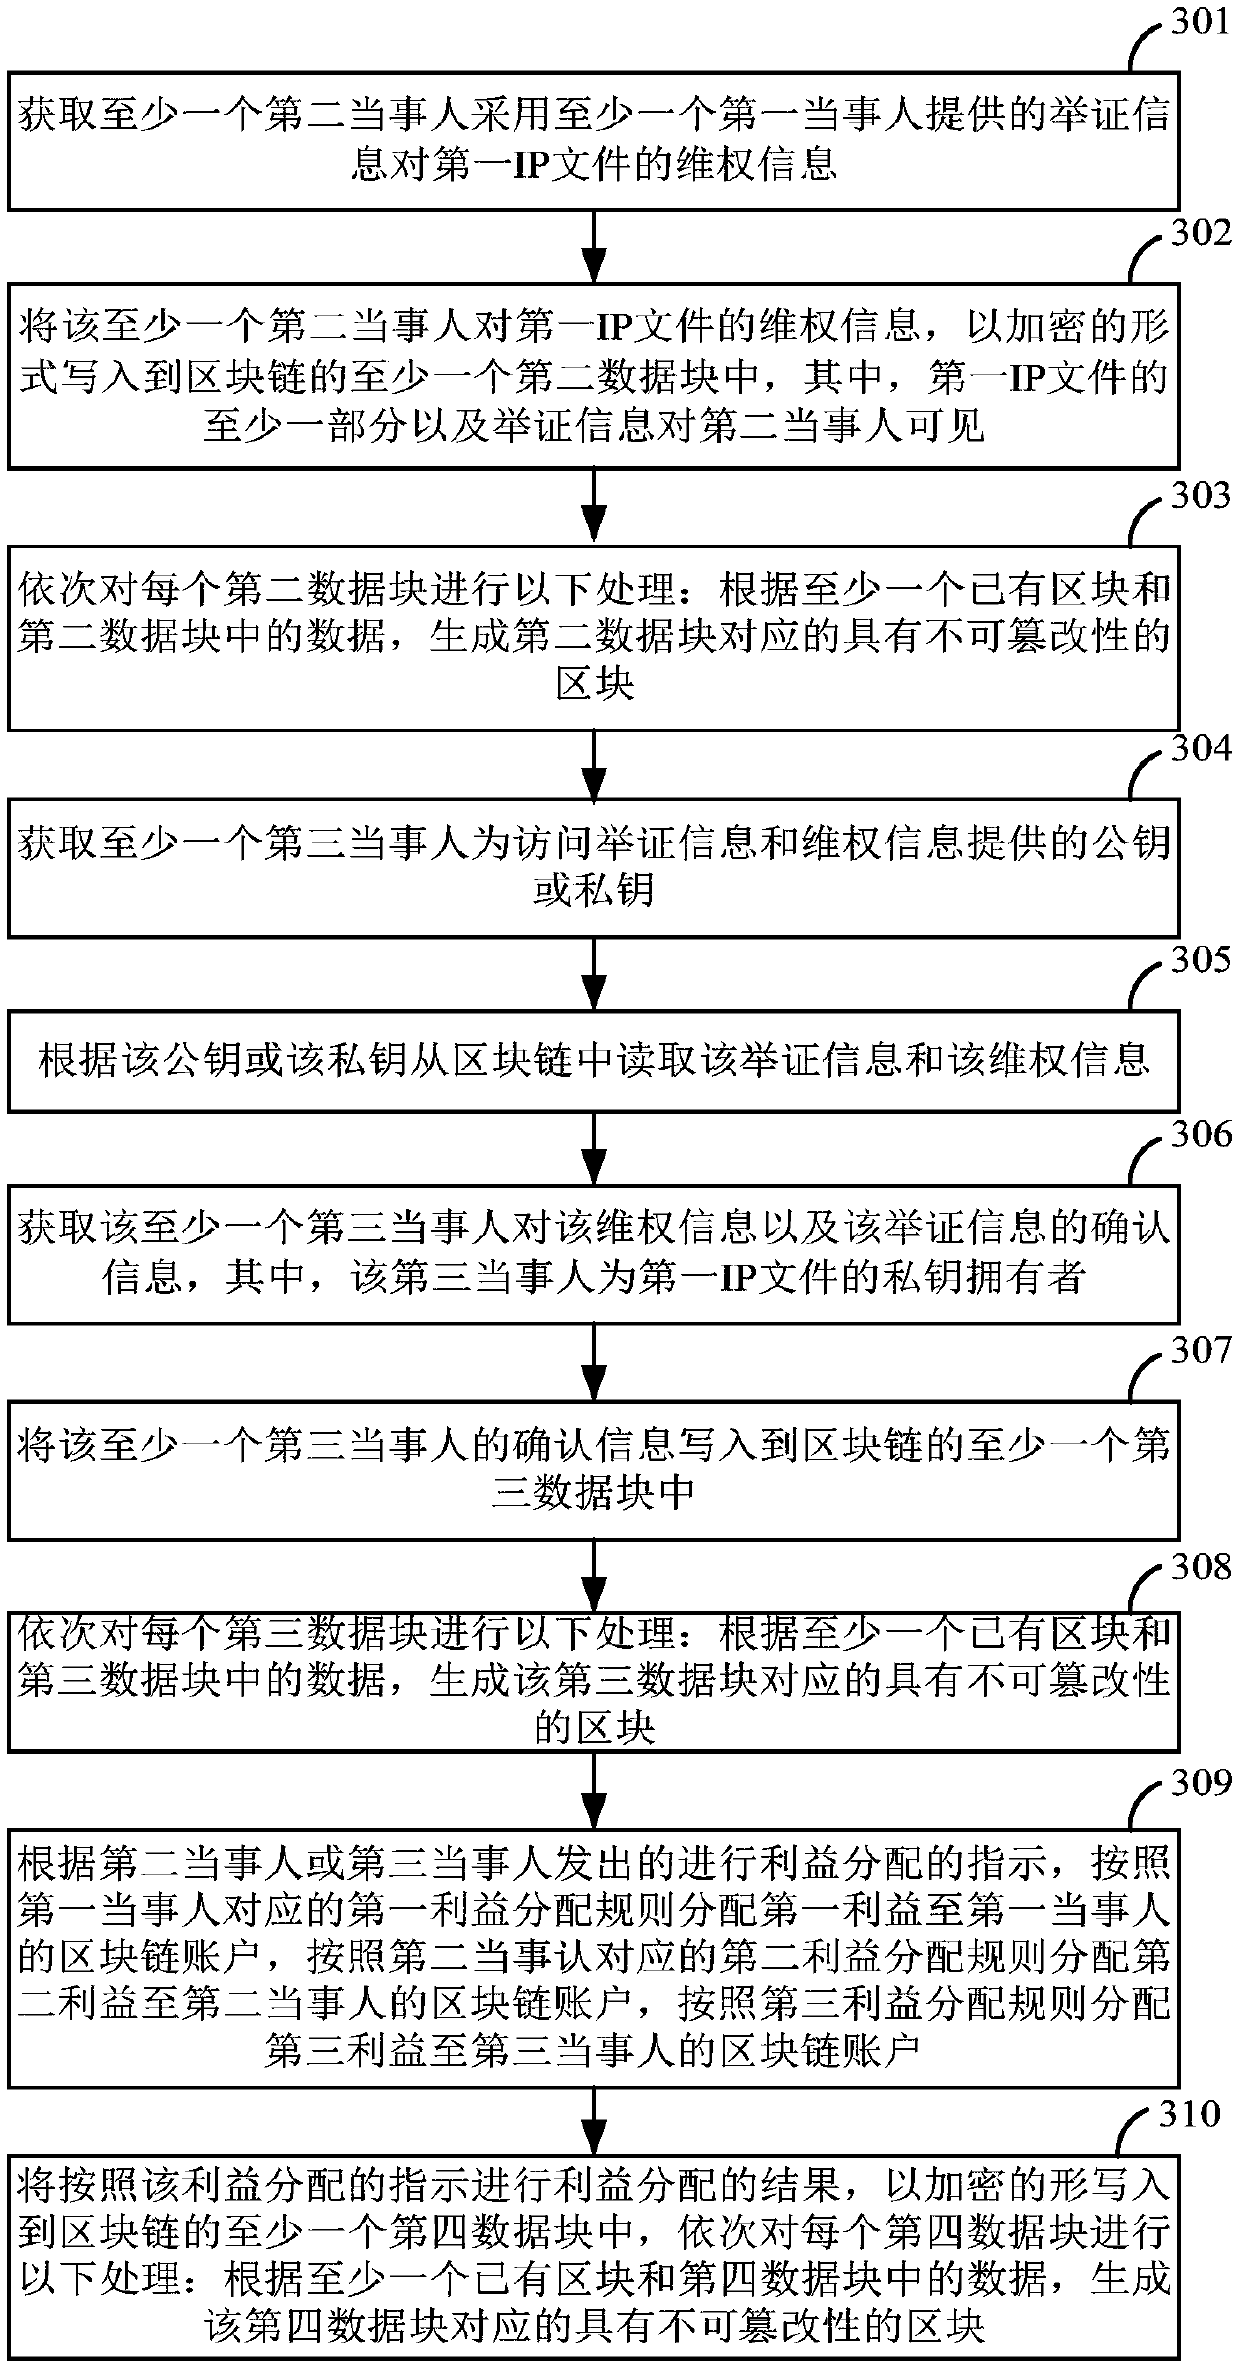 Intellectual property information management system and method